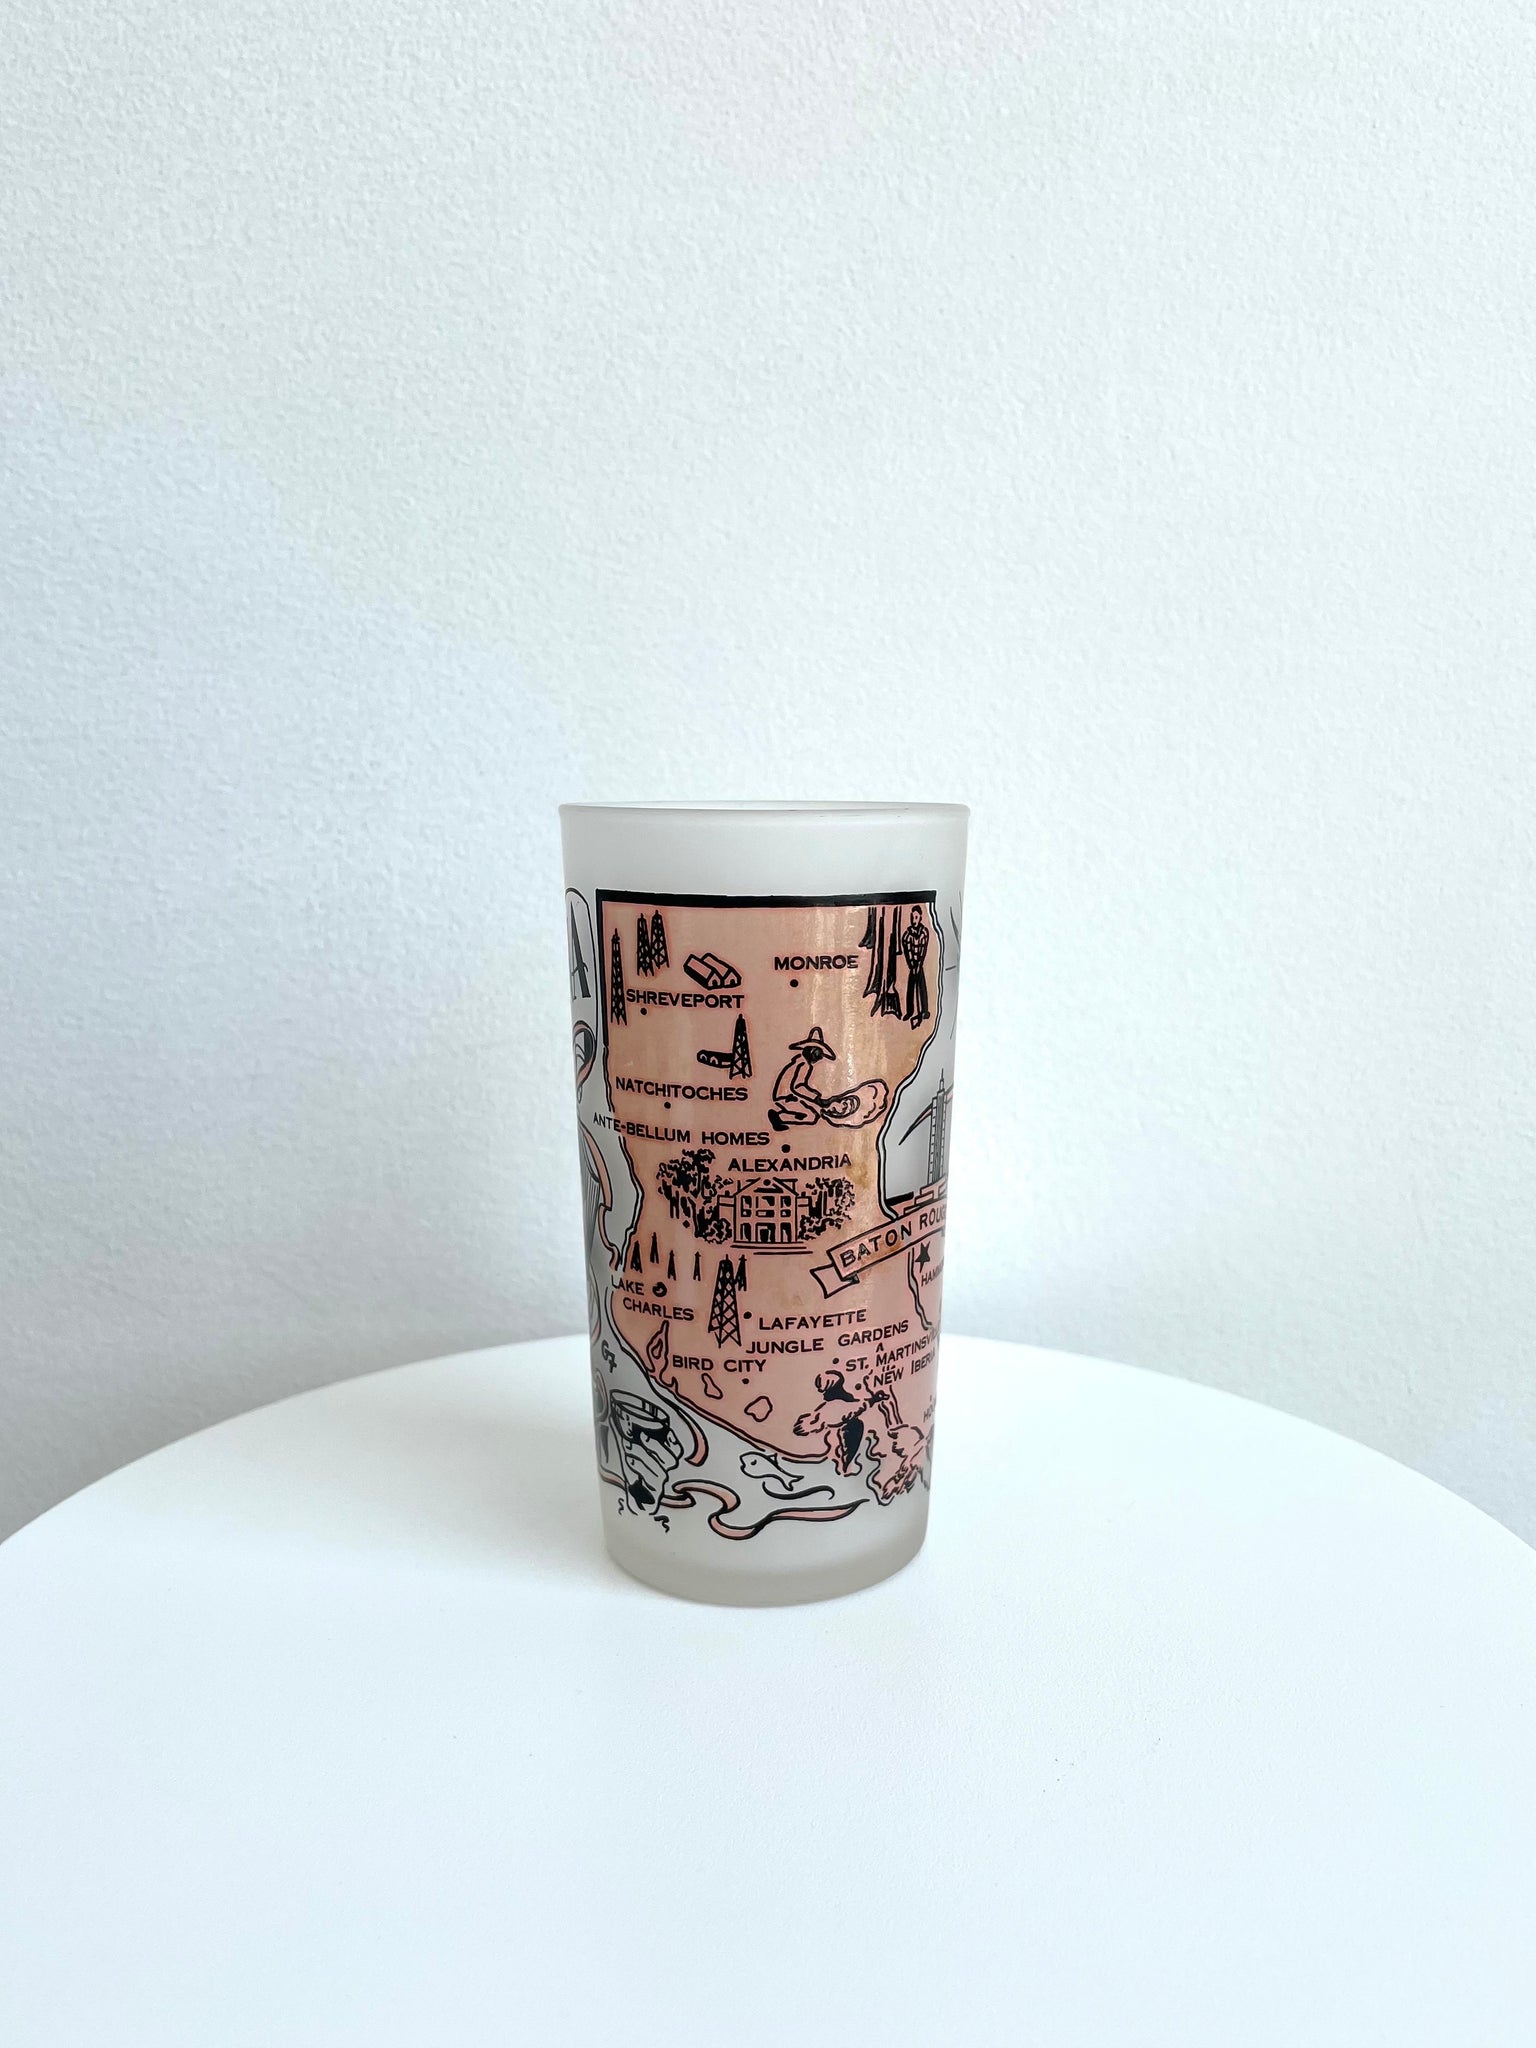 MARDI GRAS FROSTED GLASS CUP